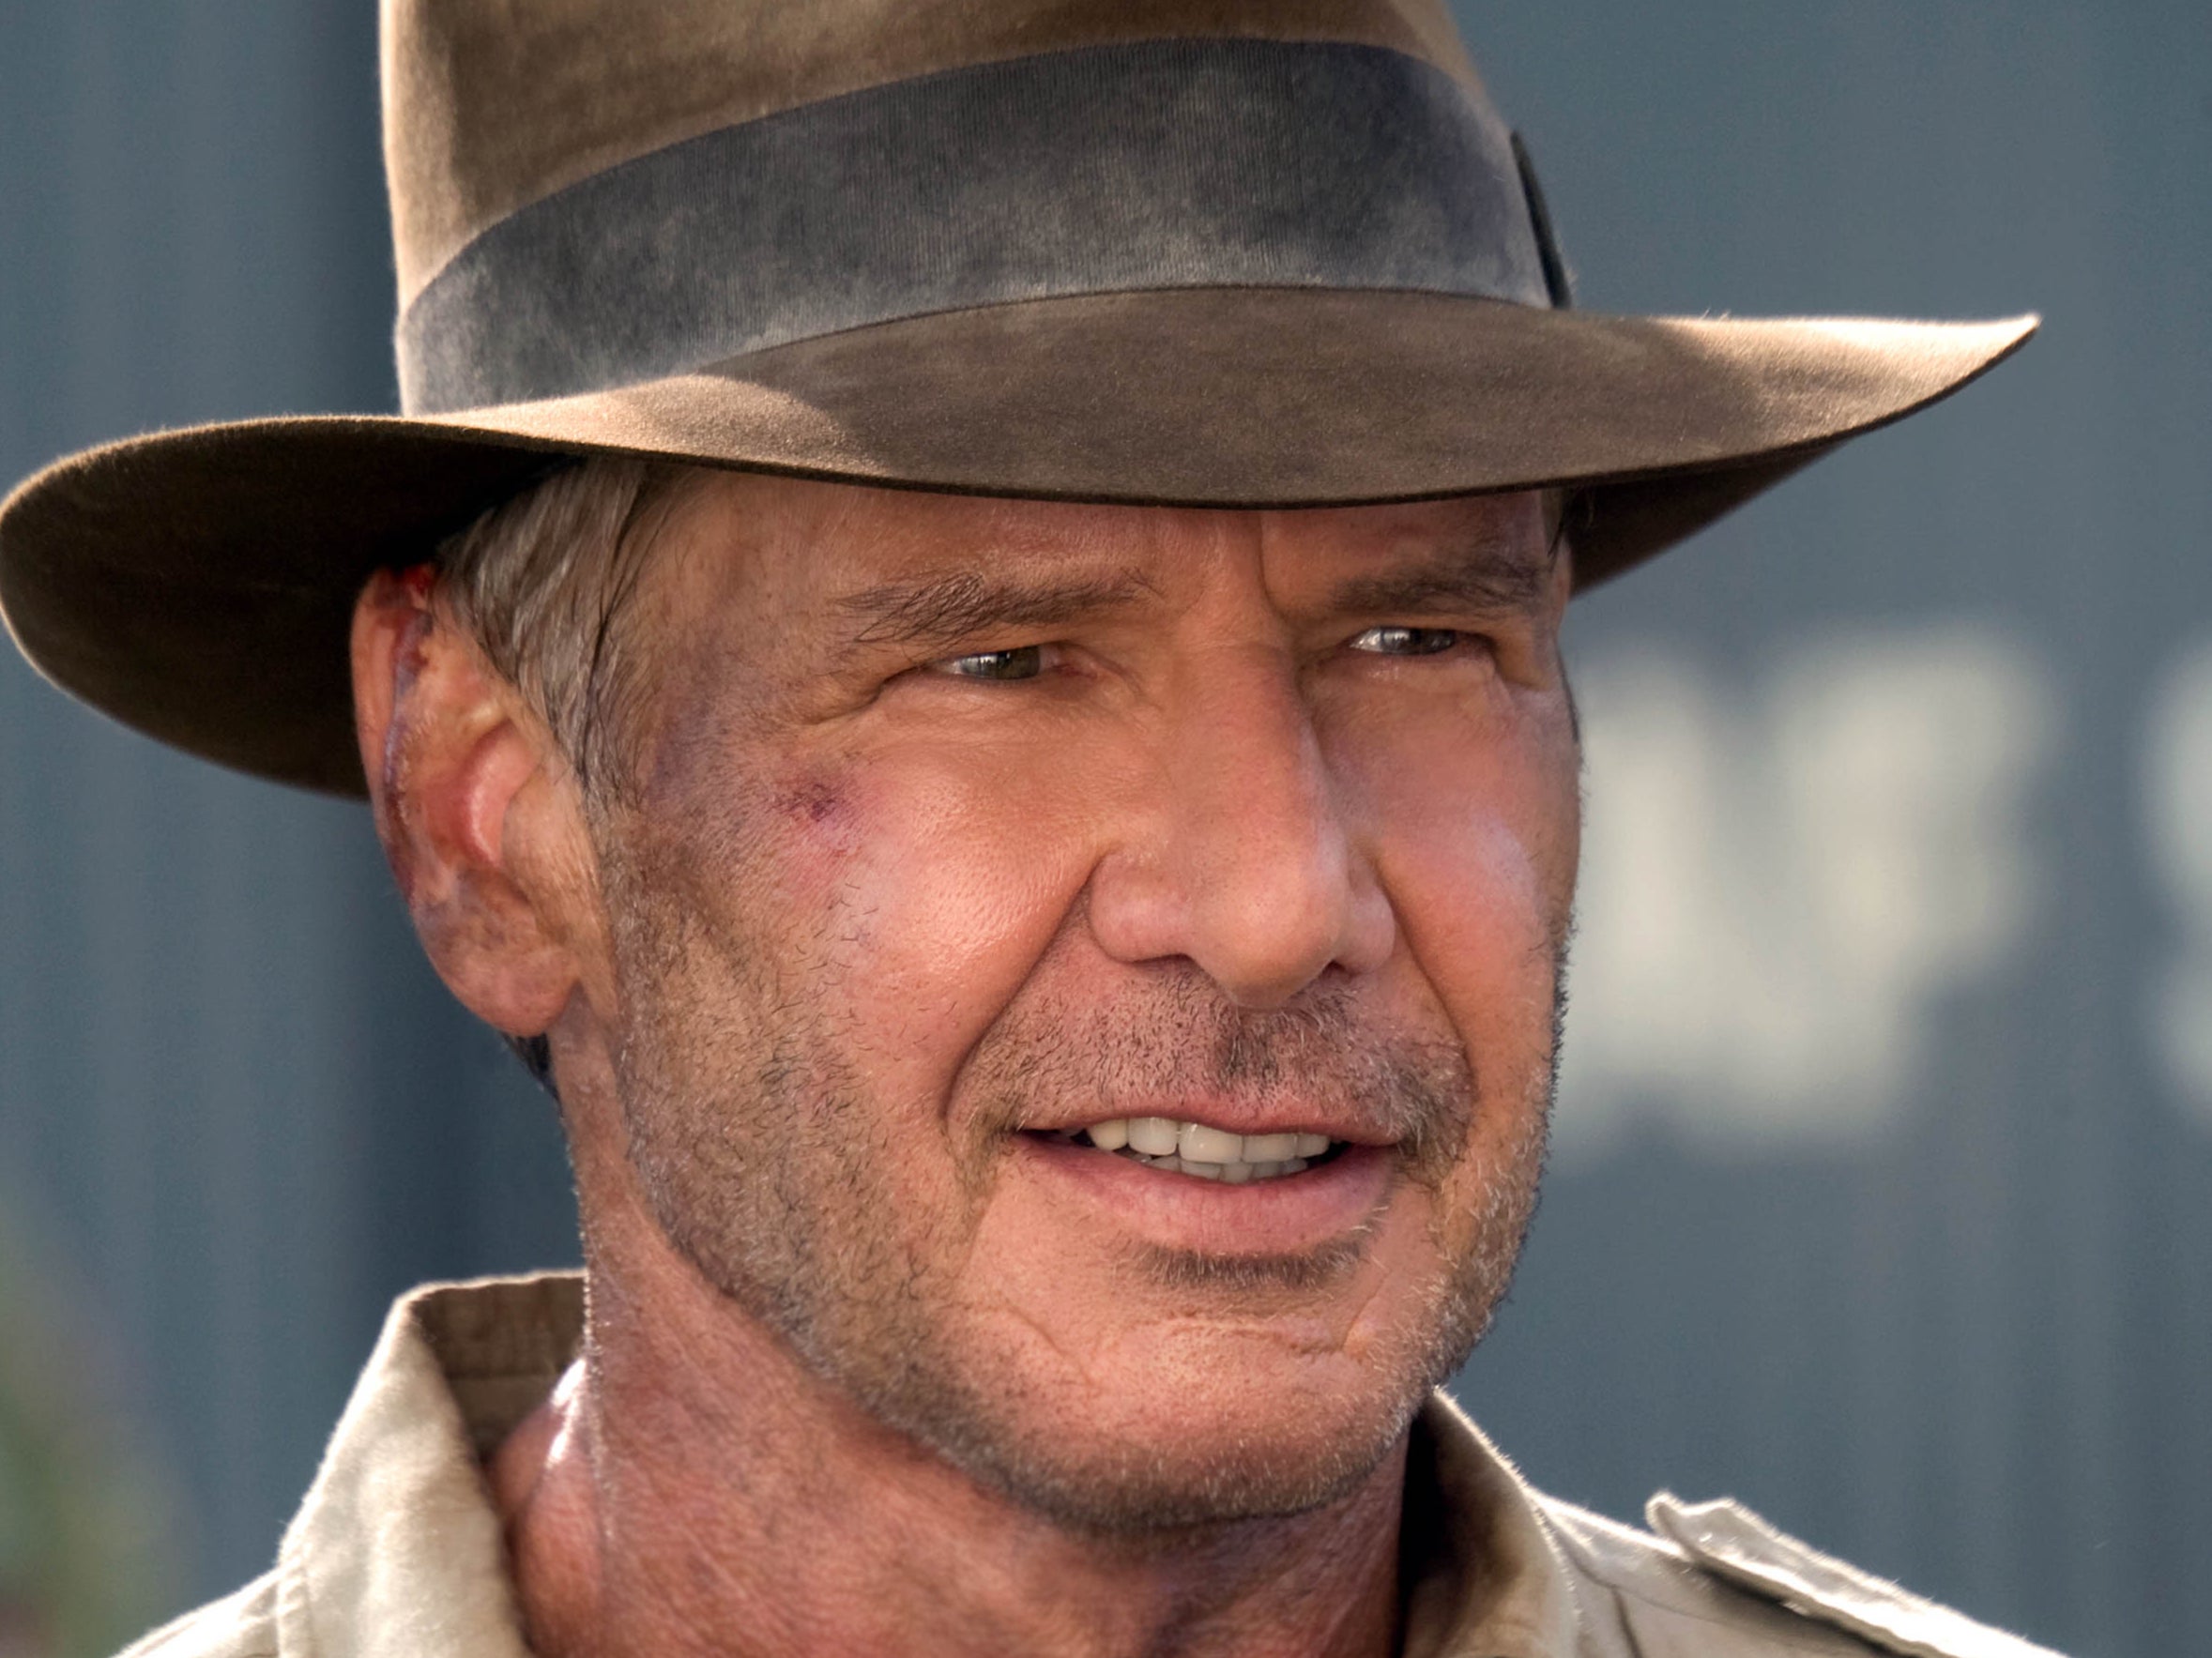 Harrison Ford as Indiana Jones in ‘Kingdom of the Crystal Skull'